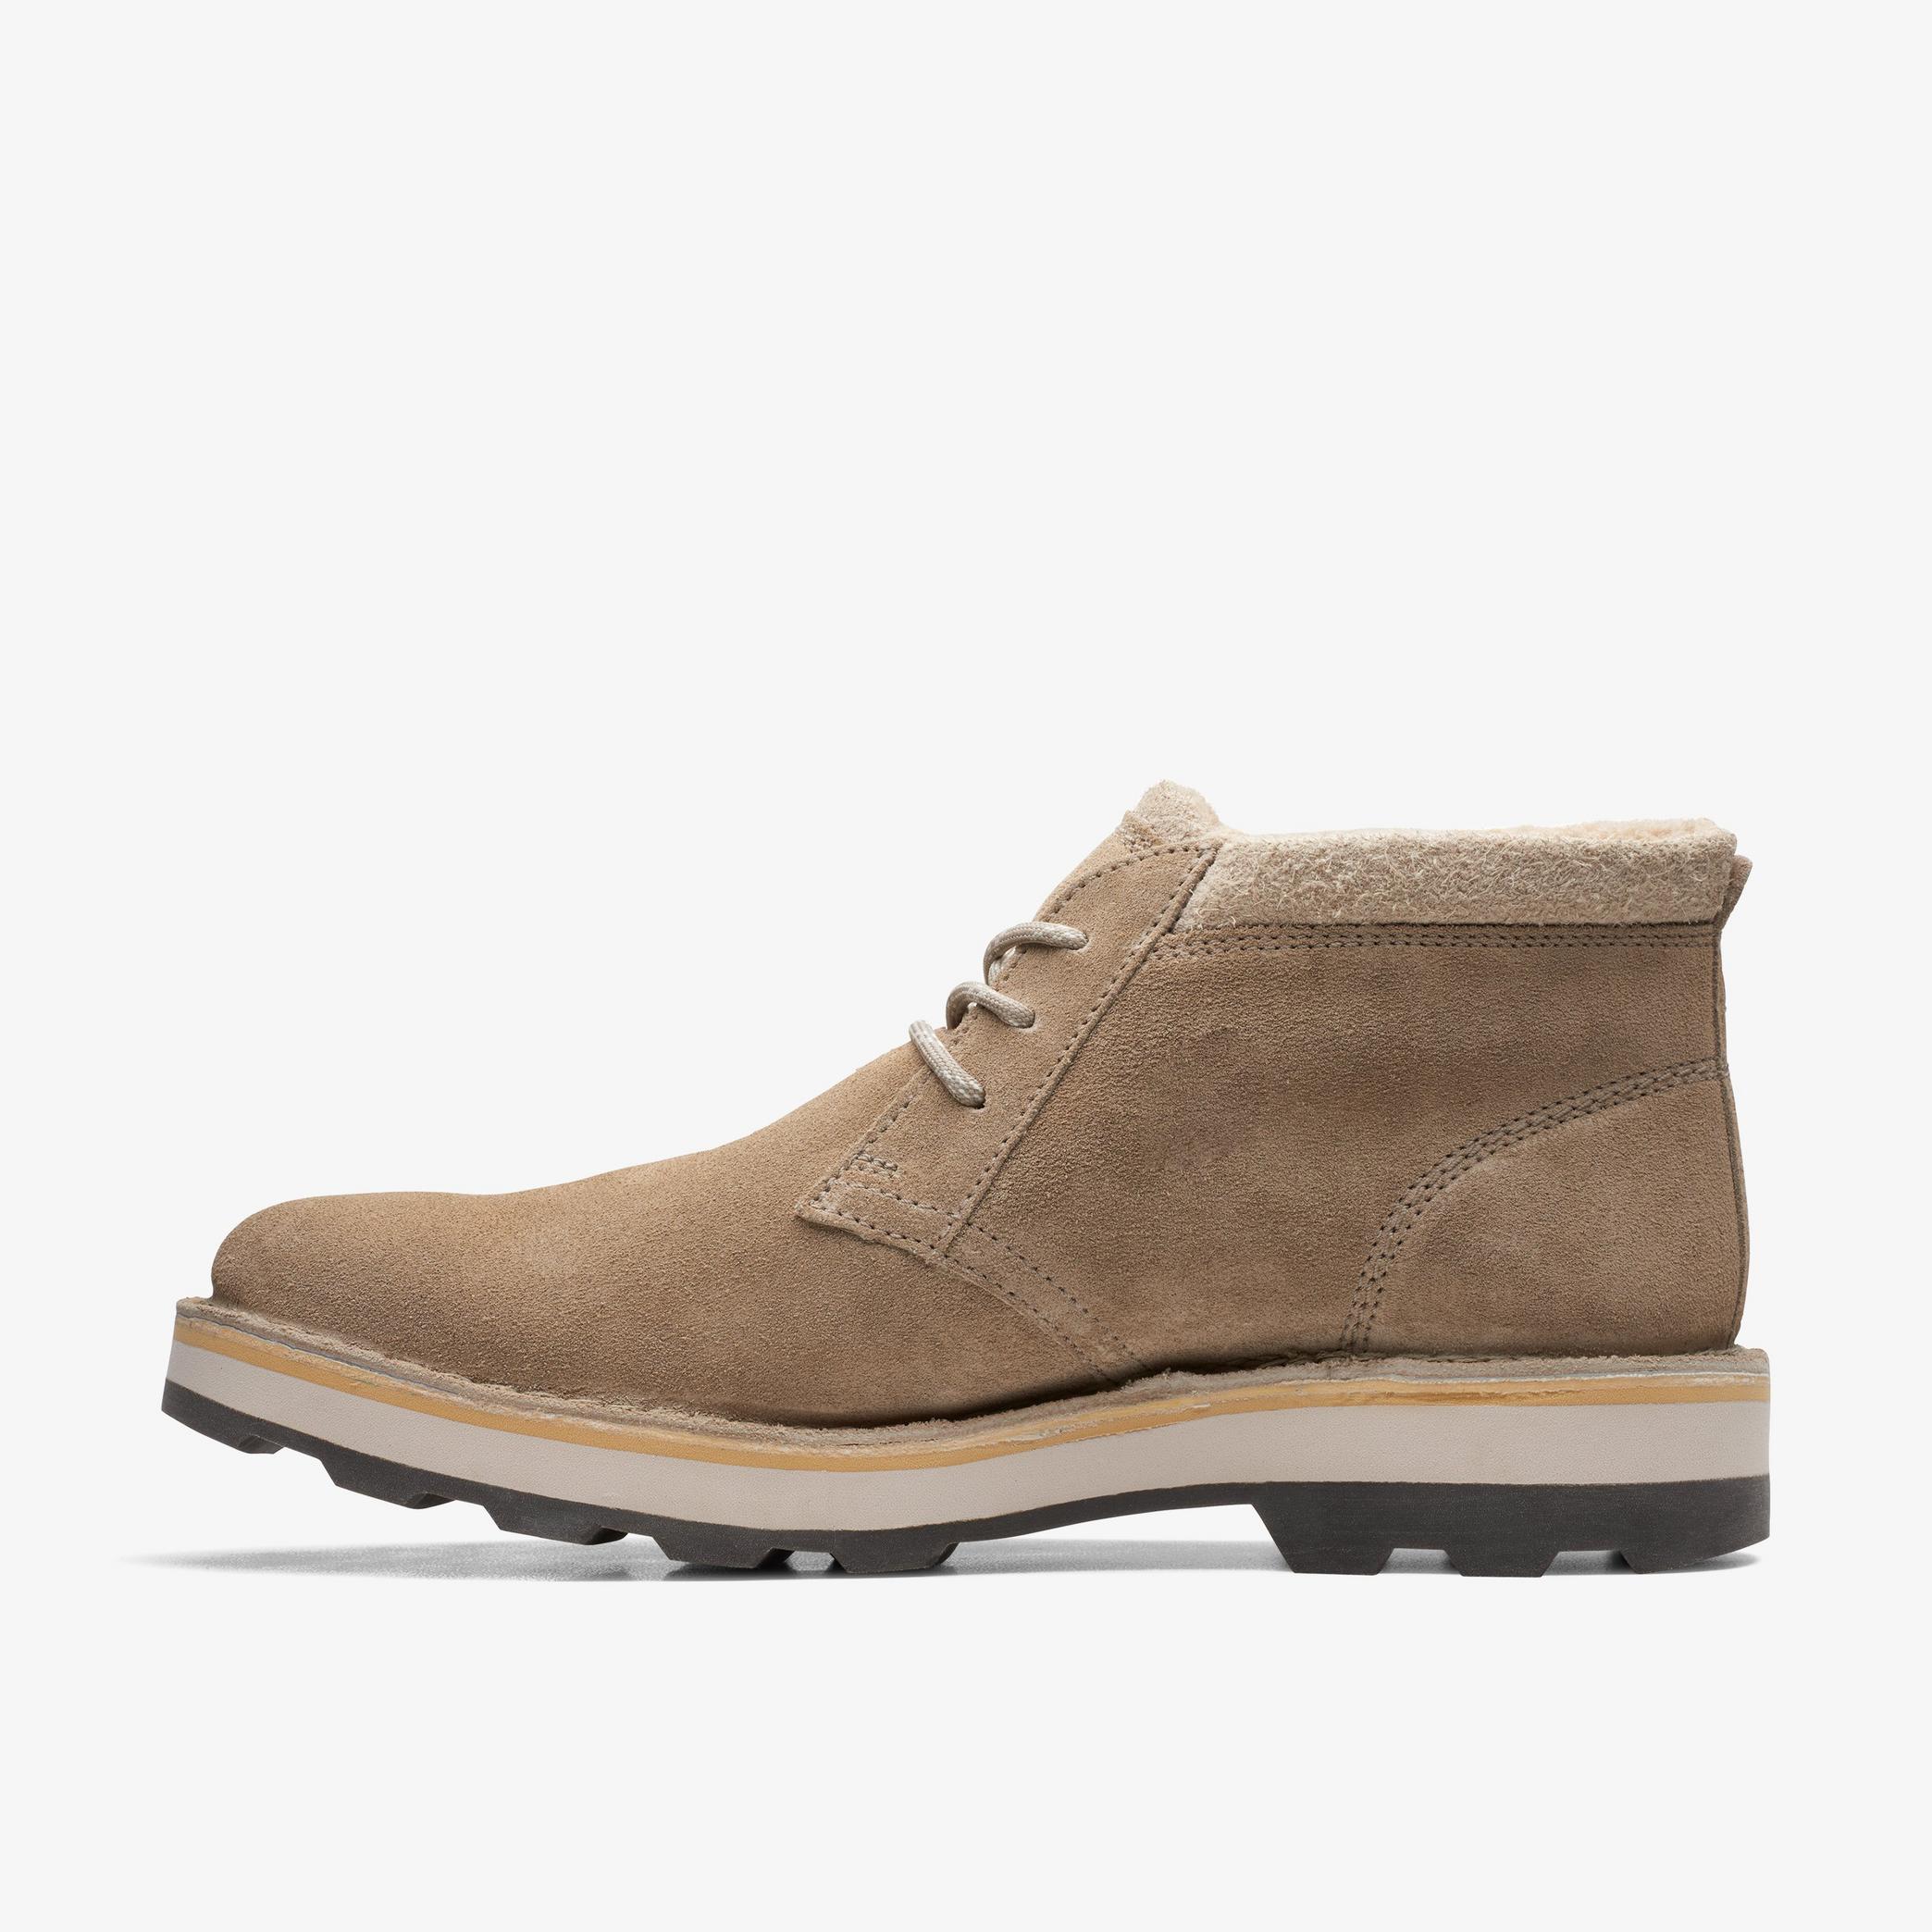 Corston DB Waterproof Sand Warmlined Ankle Boots, view 2 of 6